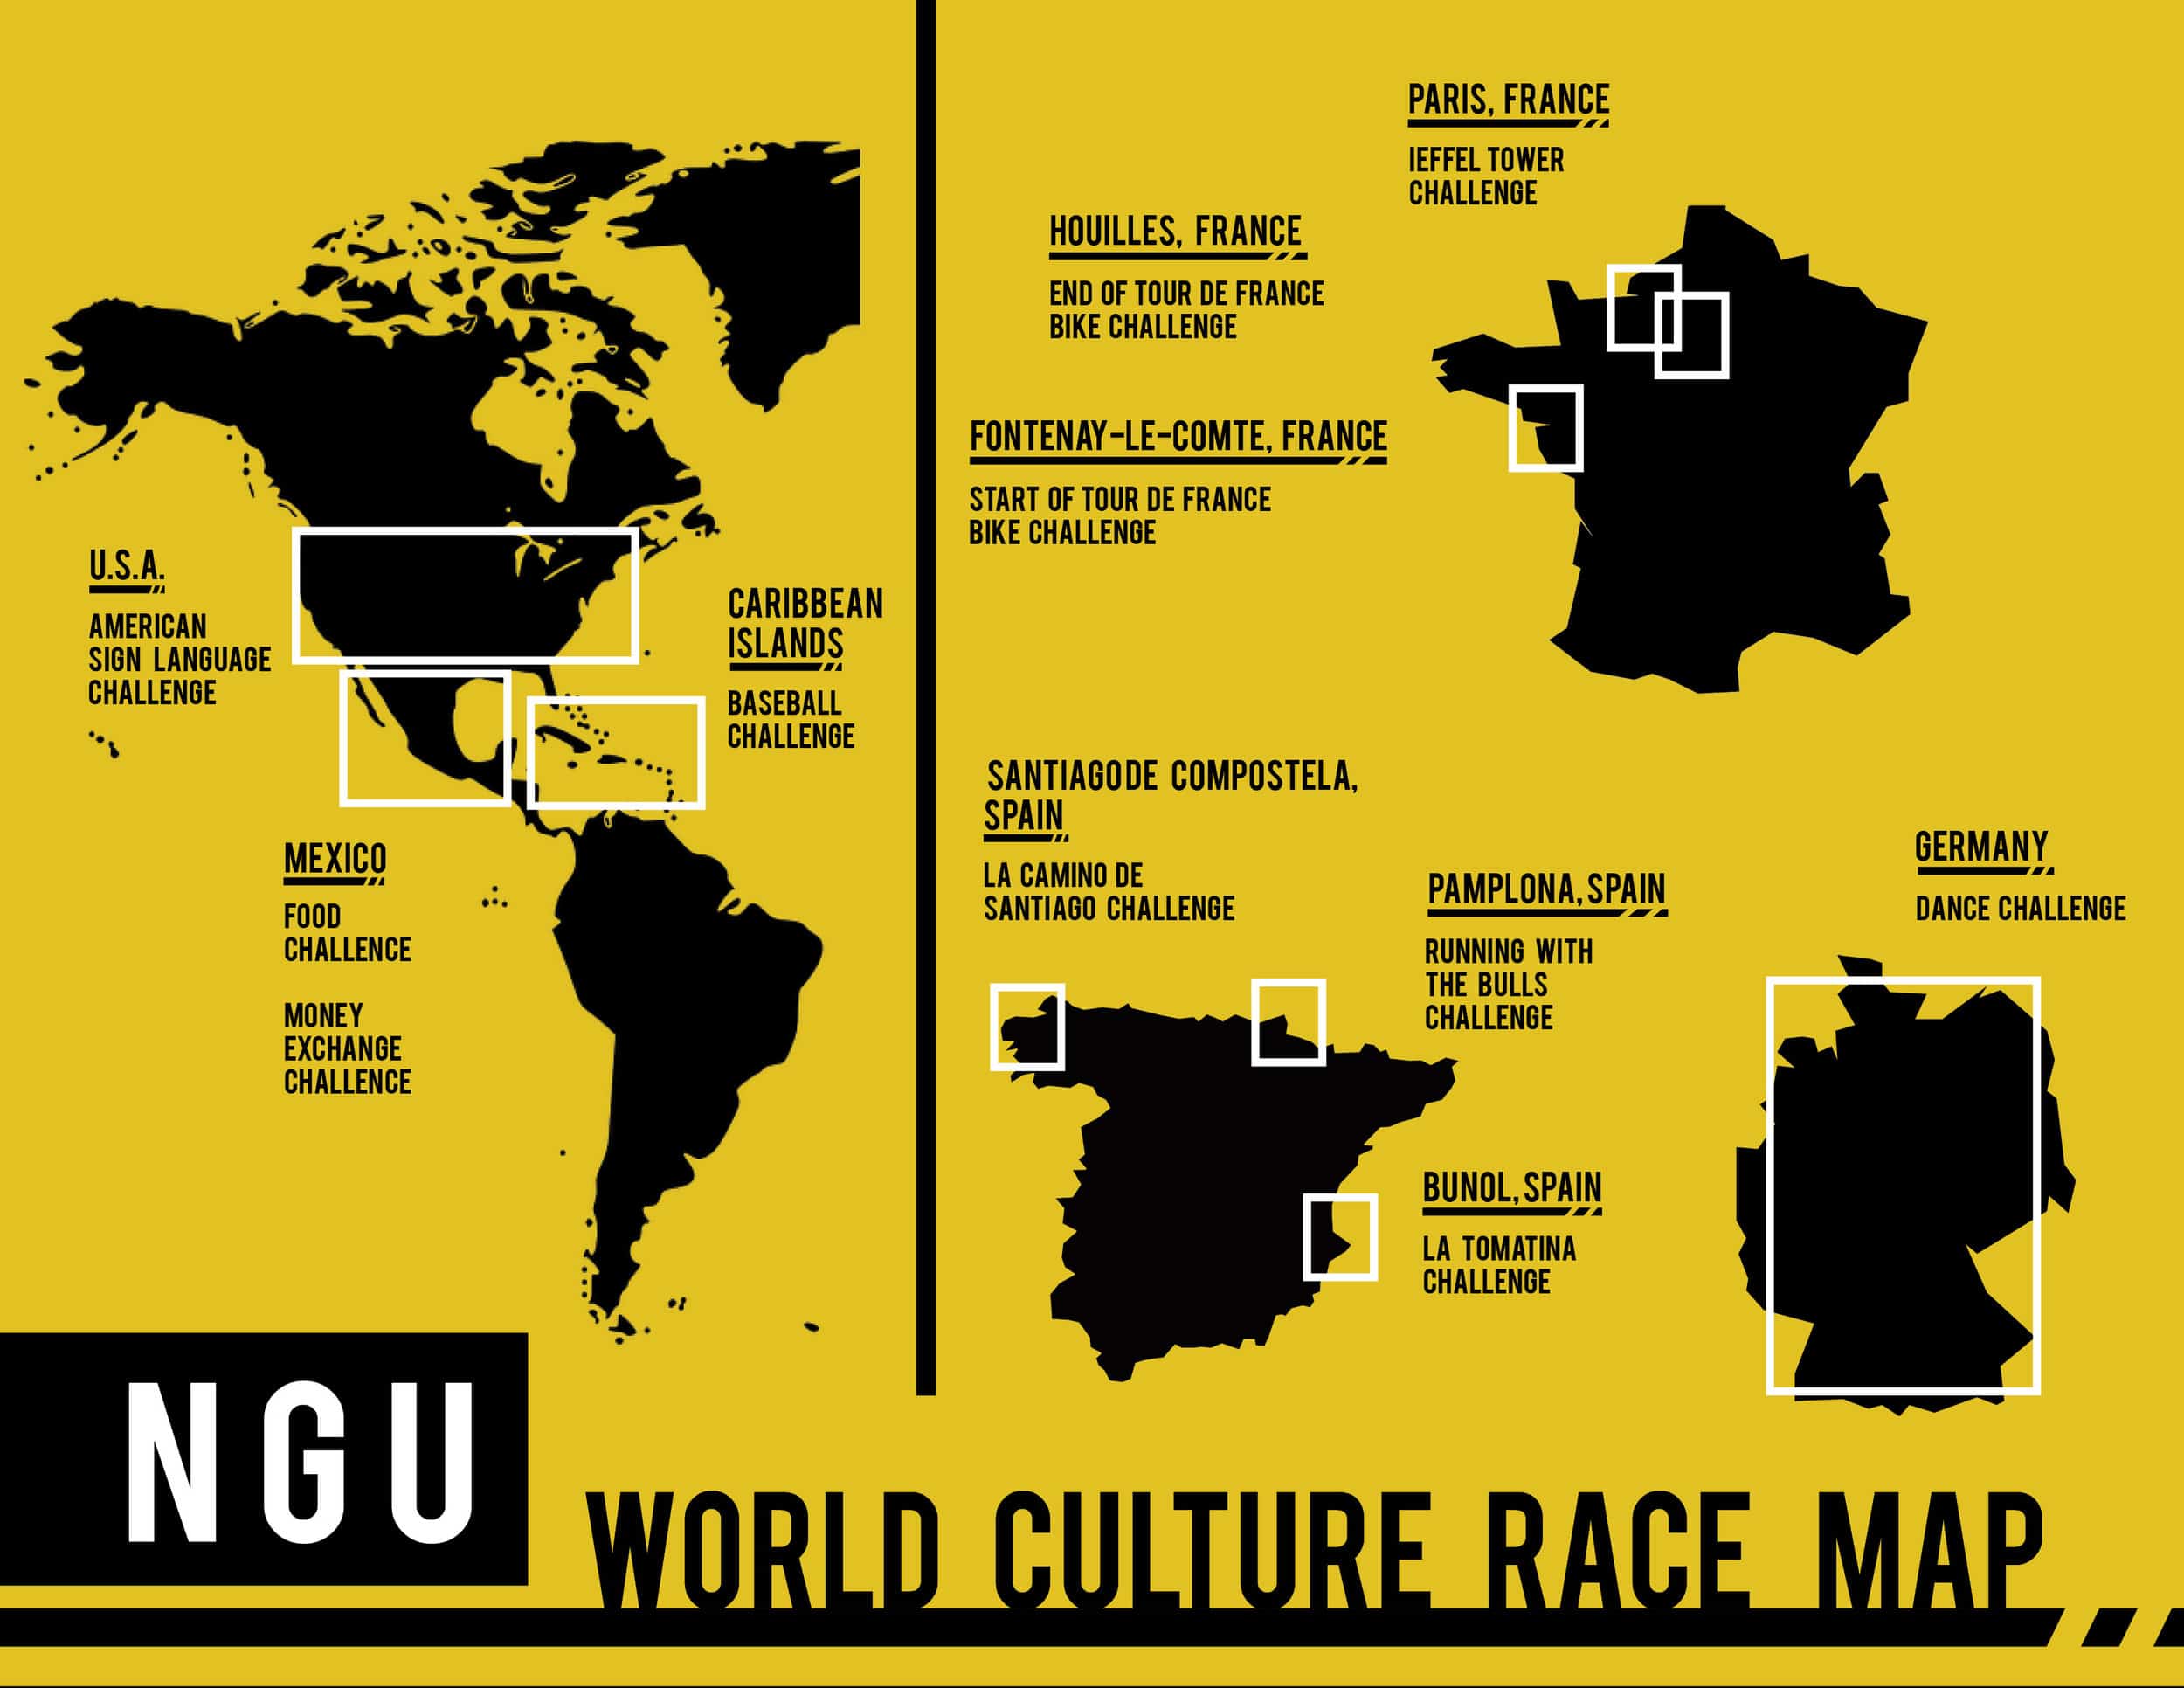 Map depicting where the events take place from the World Culture Race.